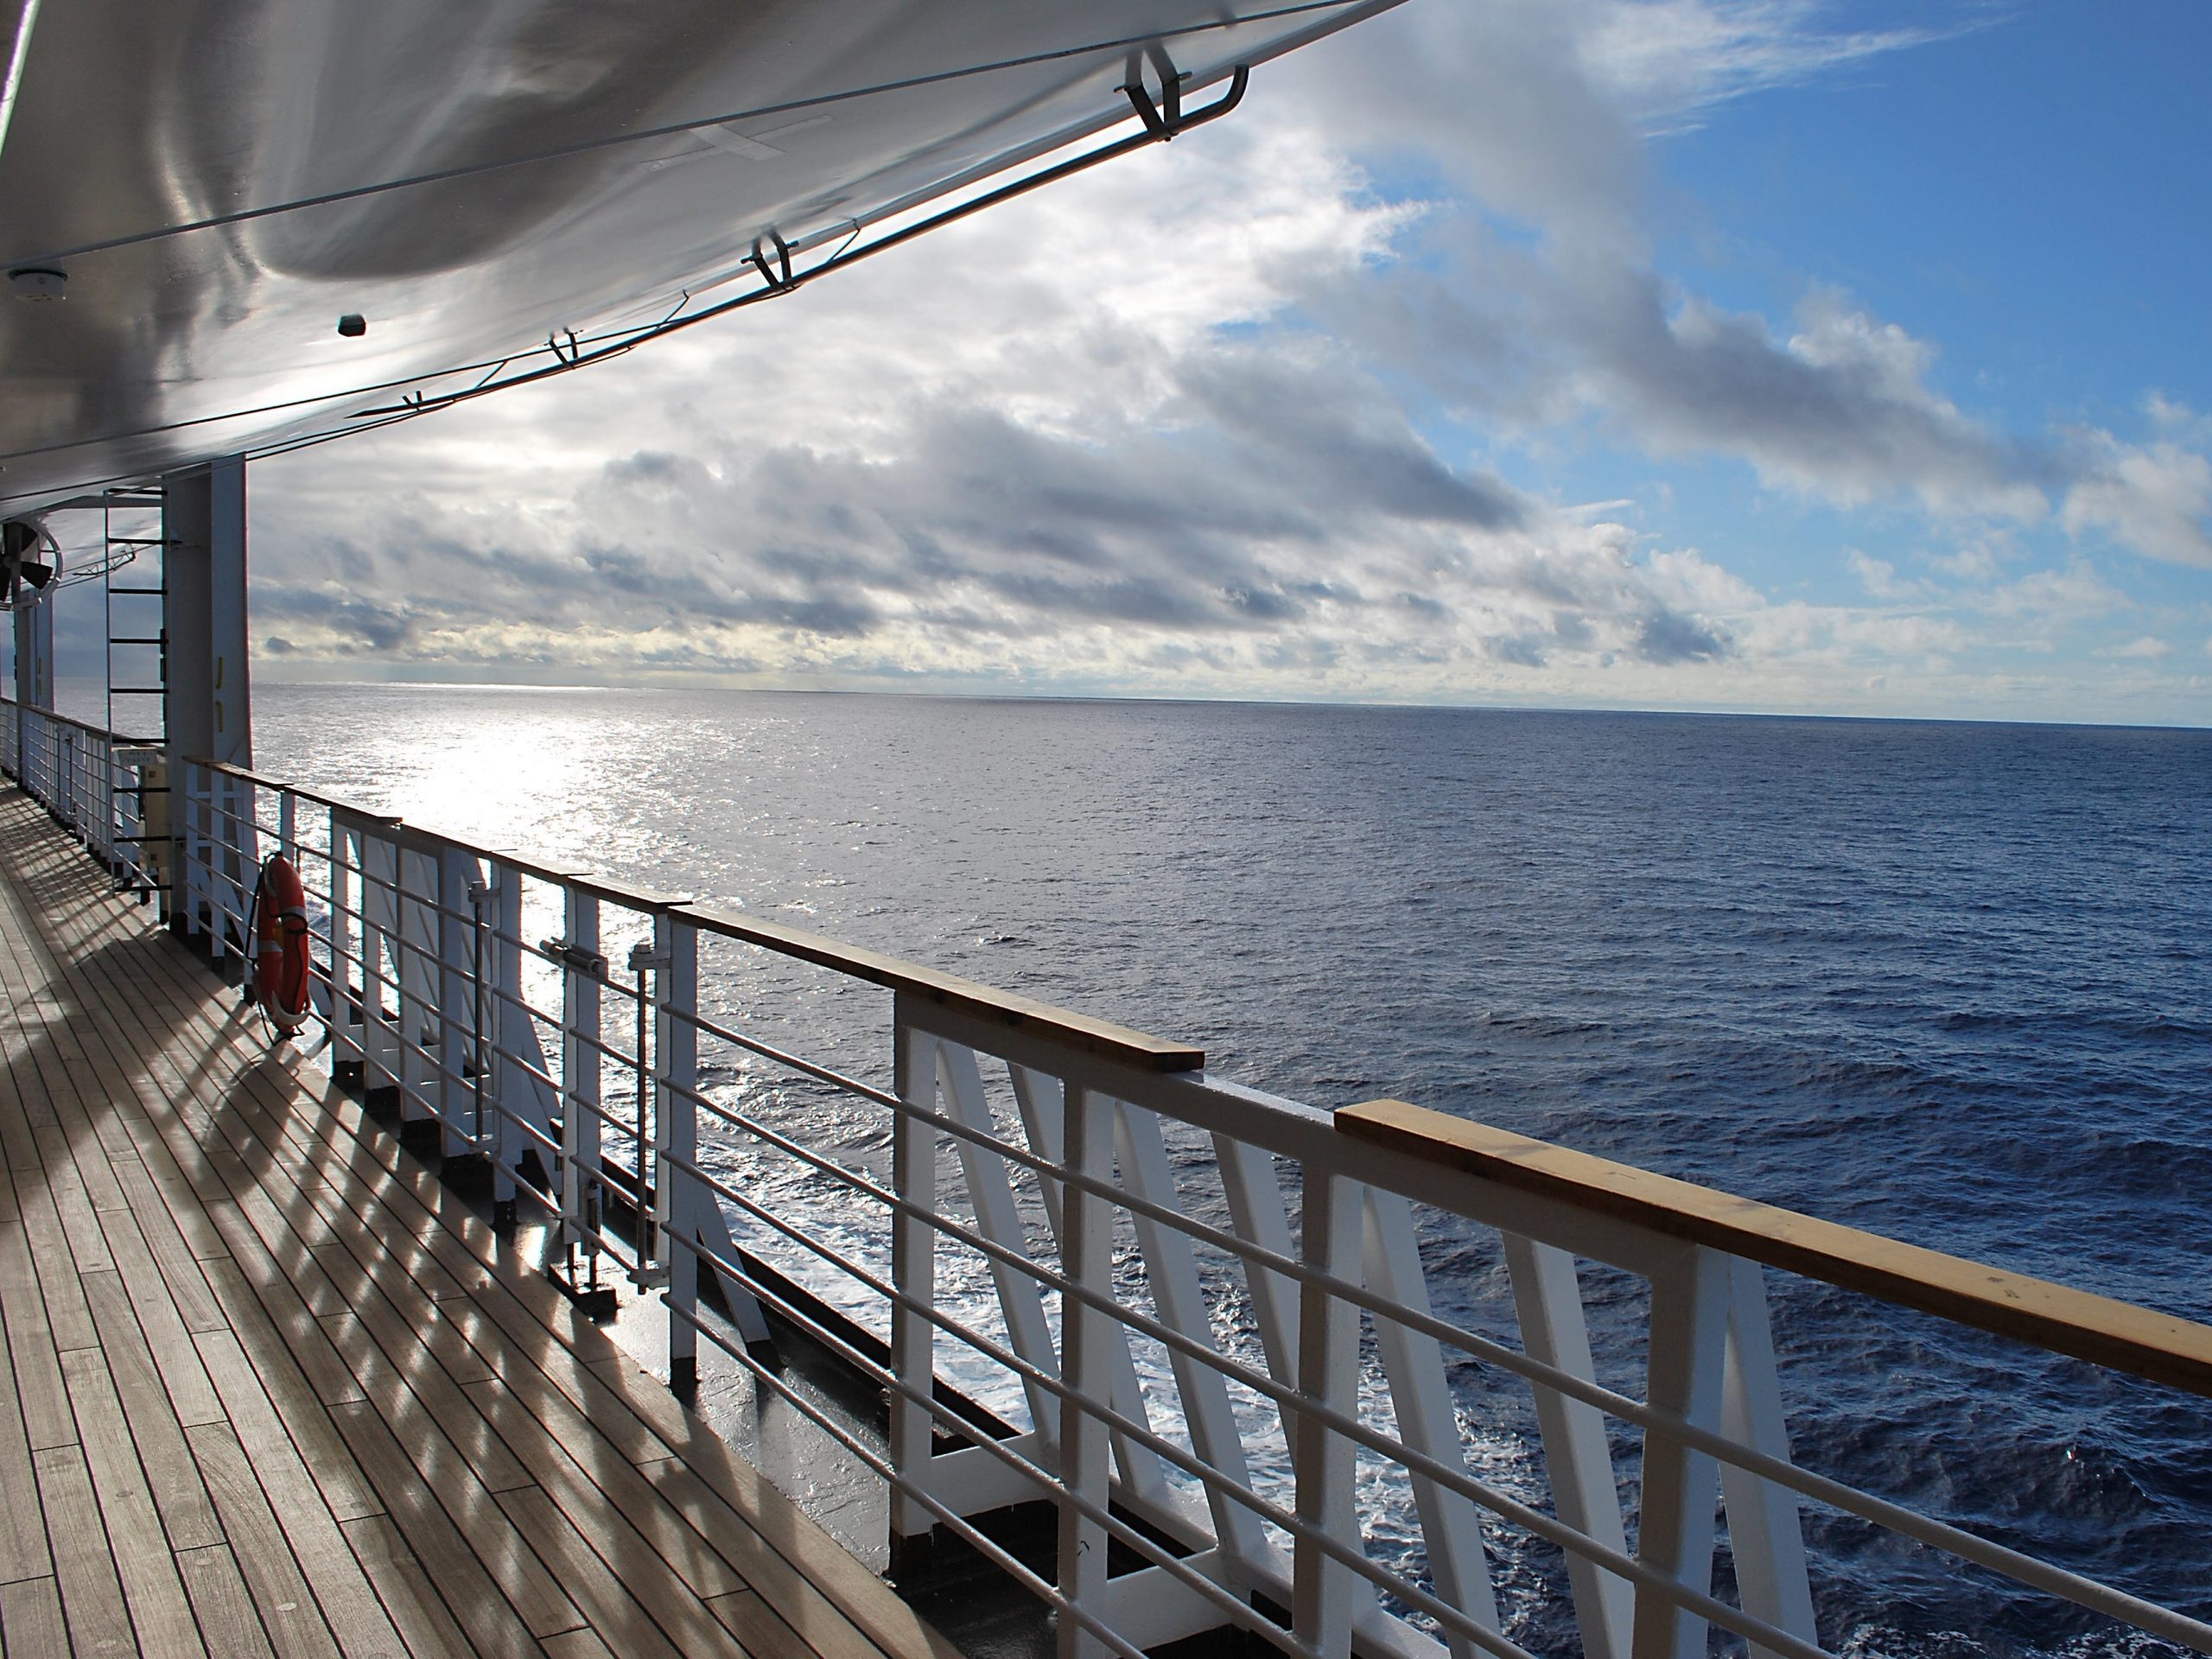 A view of the side of a cruise ship - railing and a flat blue ocean